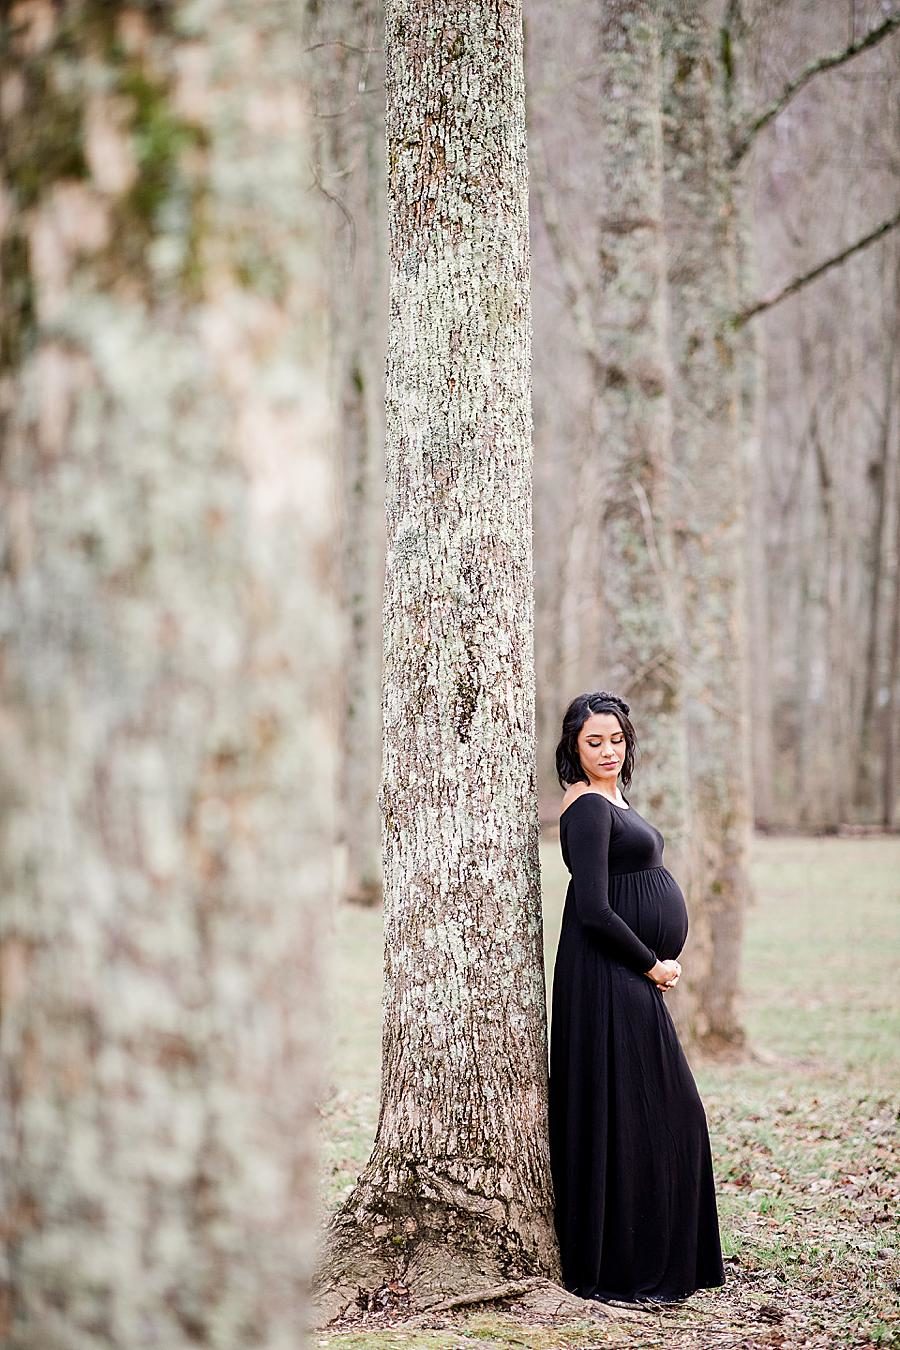 Tall trees by Knoxville Wedding Photographer, Amanda May Photos.